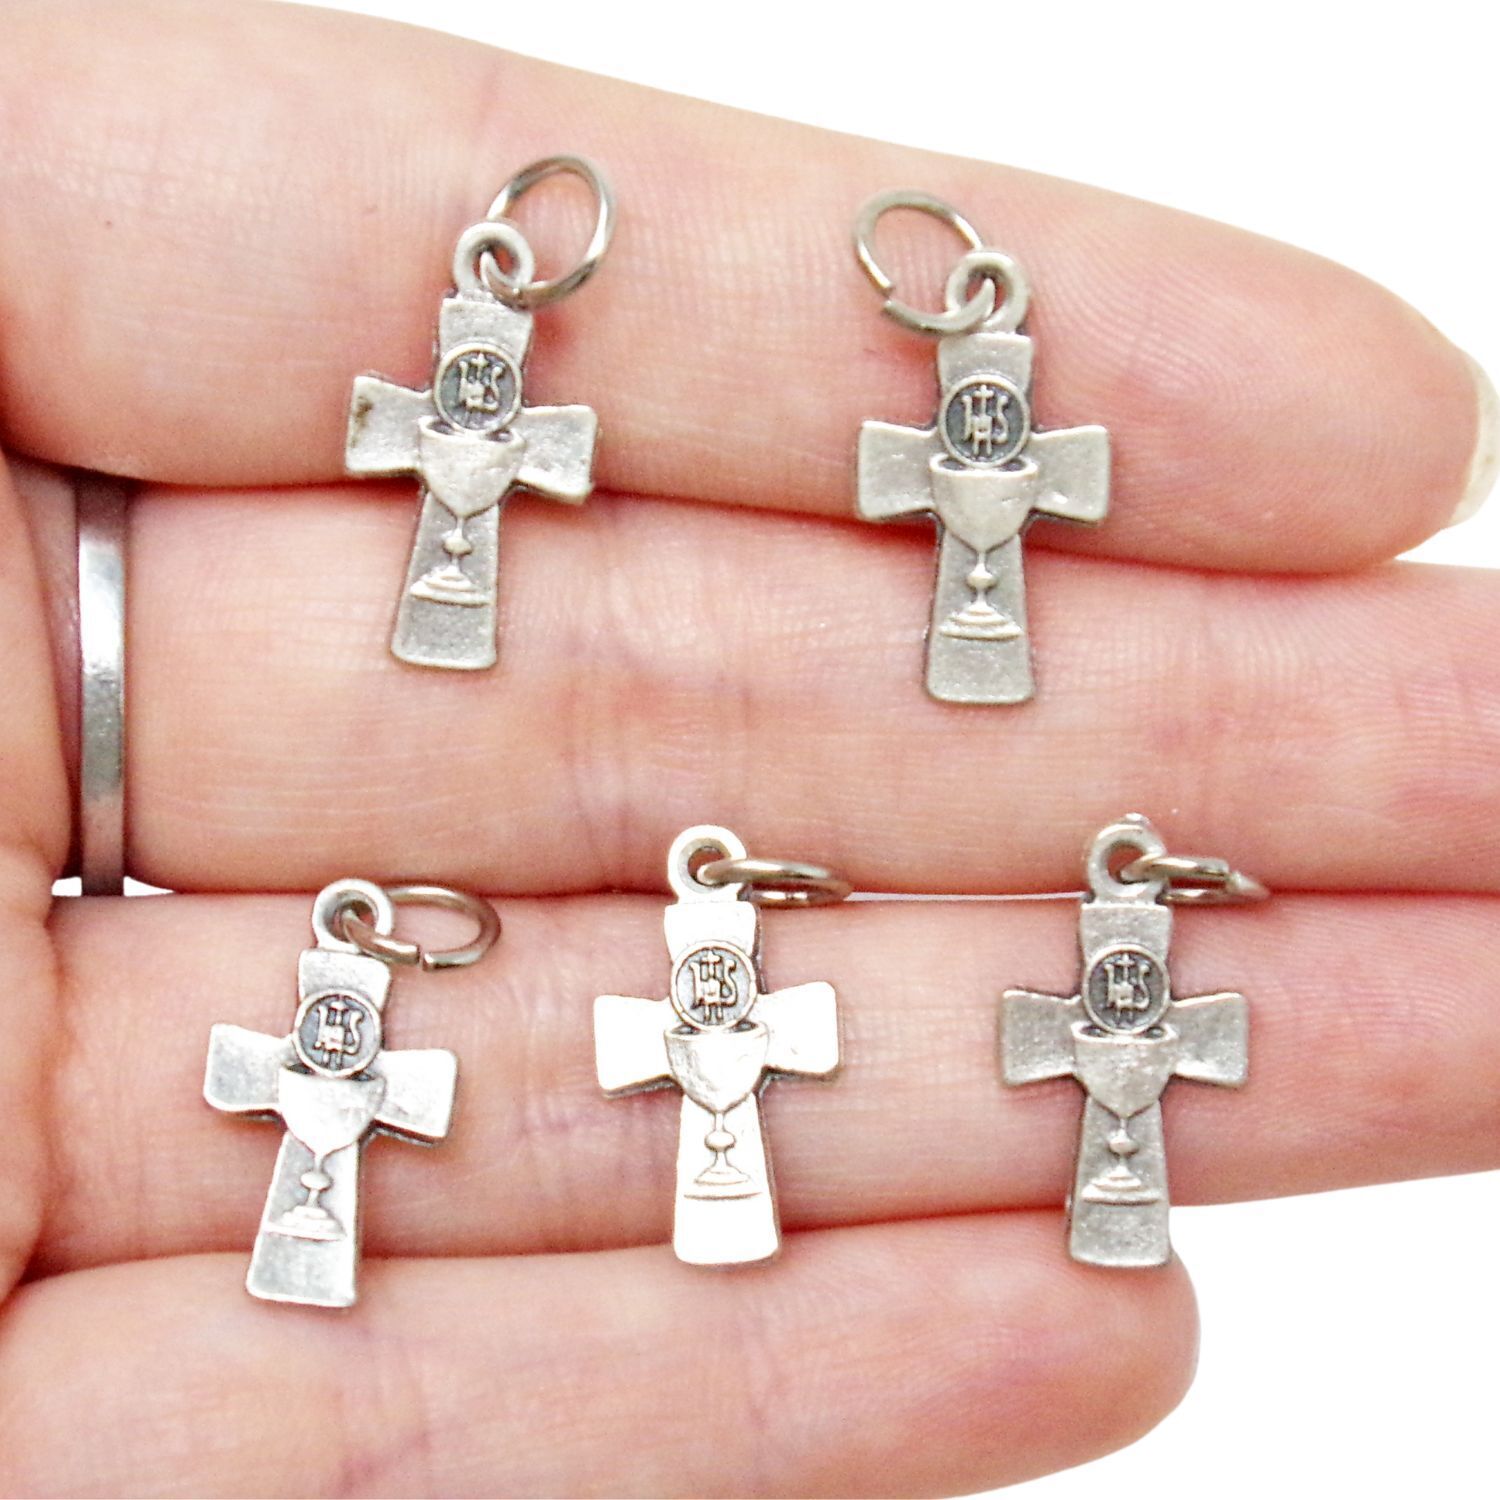 Lot of 5 First Communion Chalice Cross Silver Tone Pendant Medals Rosary Parts